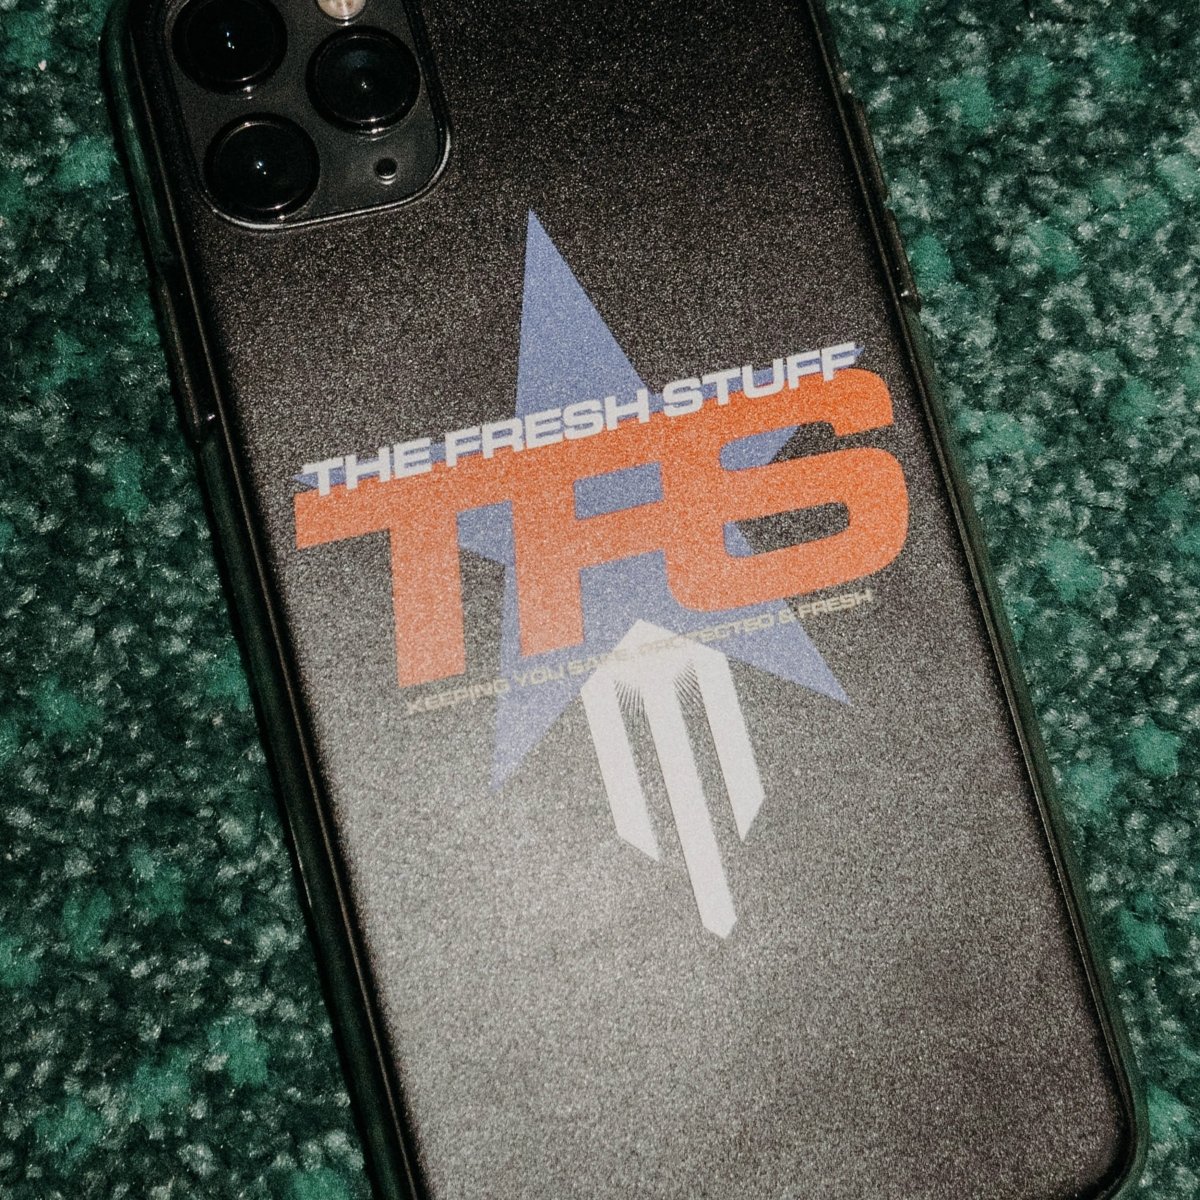 TFS - Keeping You Safe iPhone Case